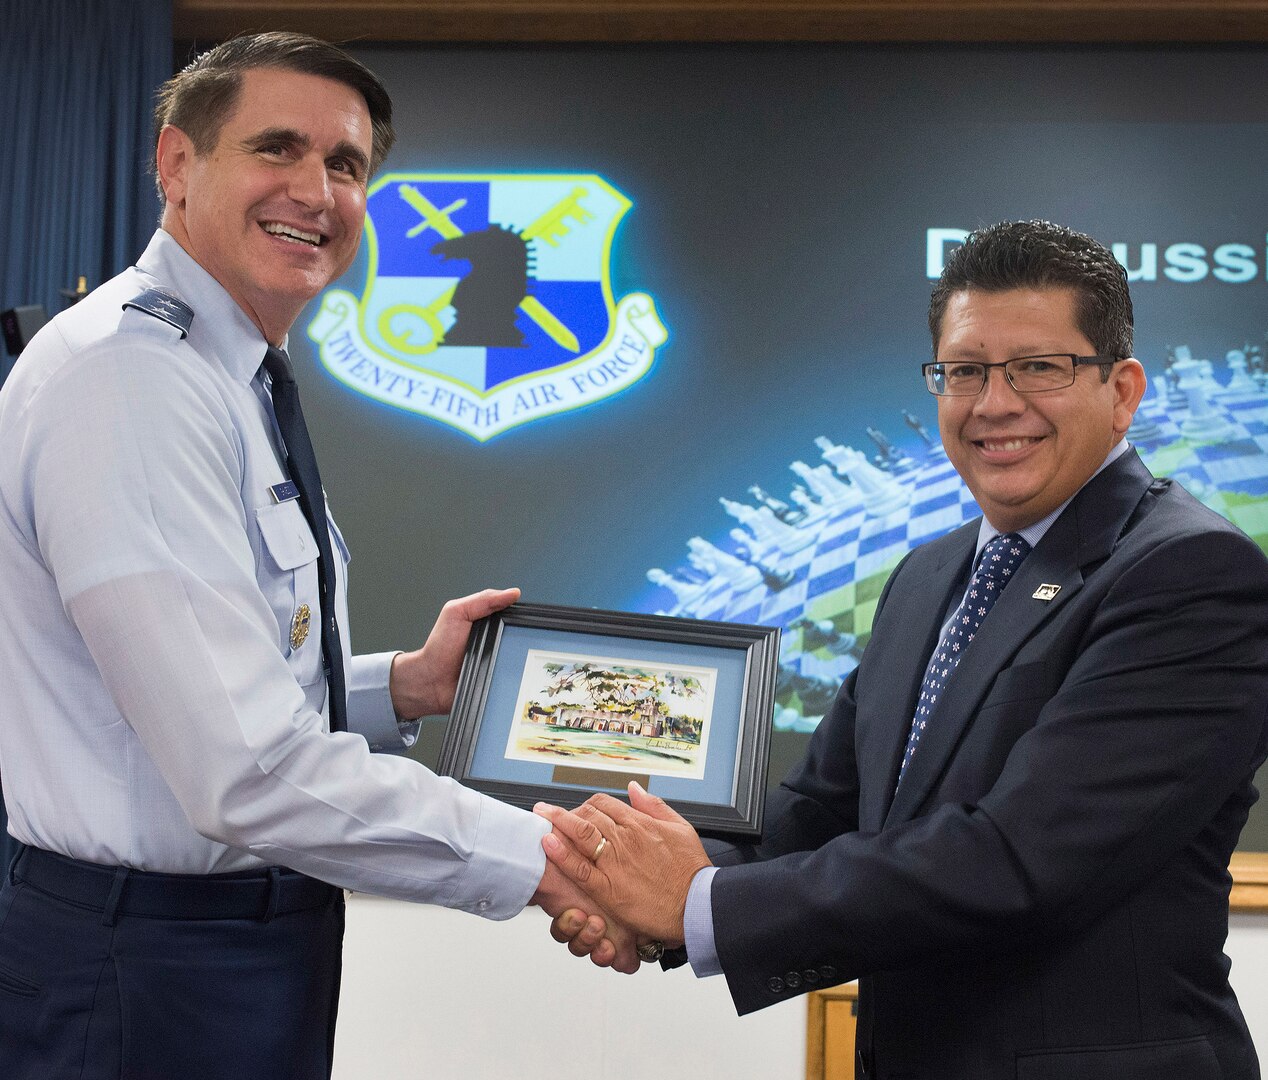 San Antonio Chamber of Commerce President Richard Perez presents Maj. General. Bradford “BJ” Shwedo with an original watercolor of a historic San Antonio mission during the Chamber’s vist to 25th Air Force headquarters, JBSA-Lackland, Friday.